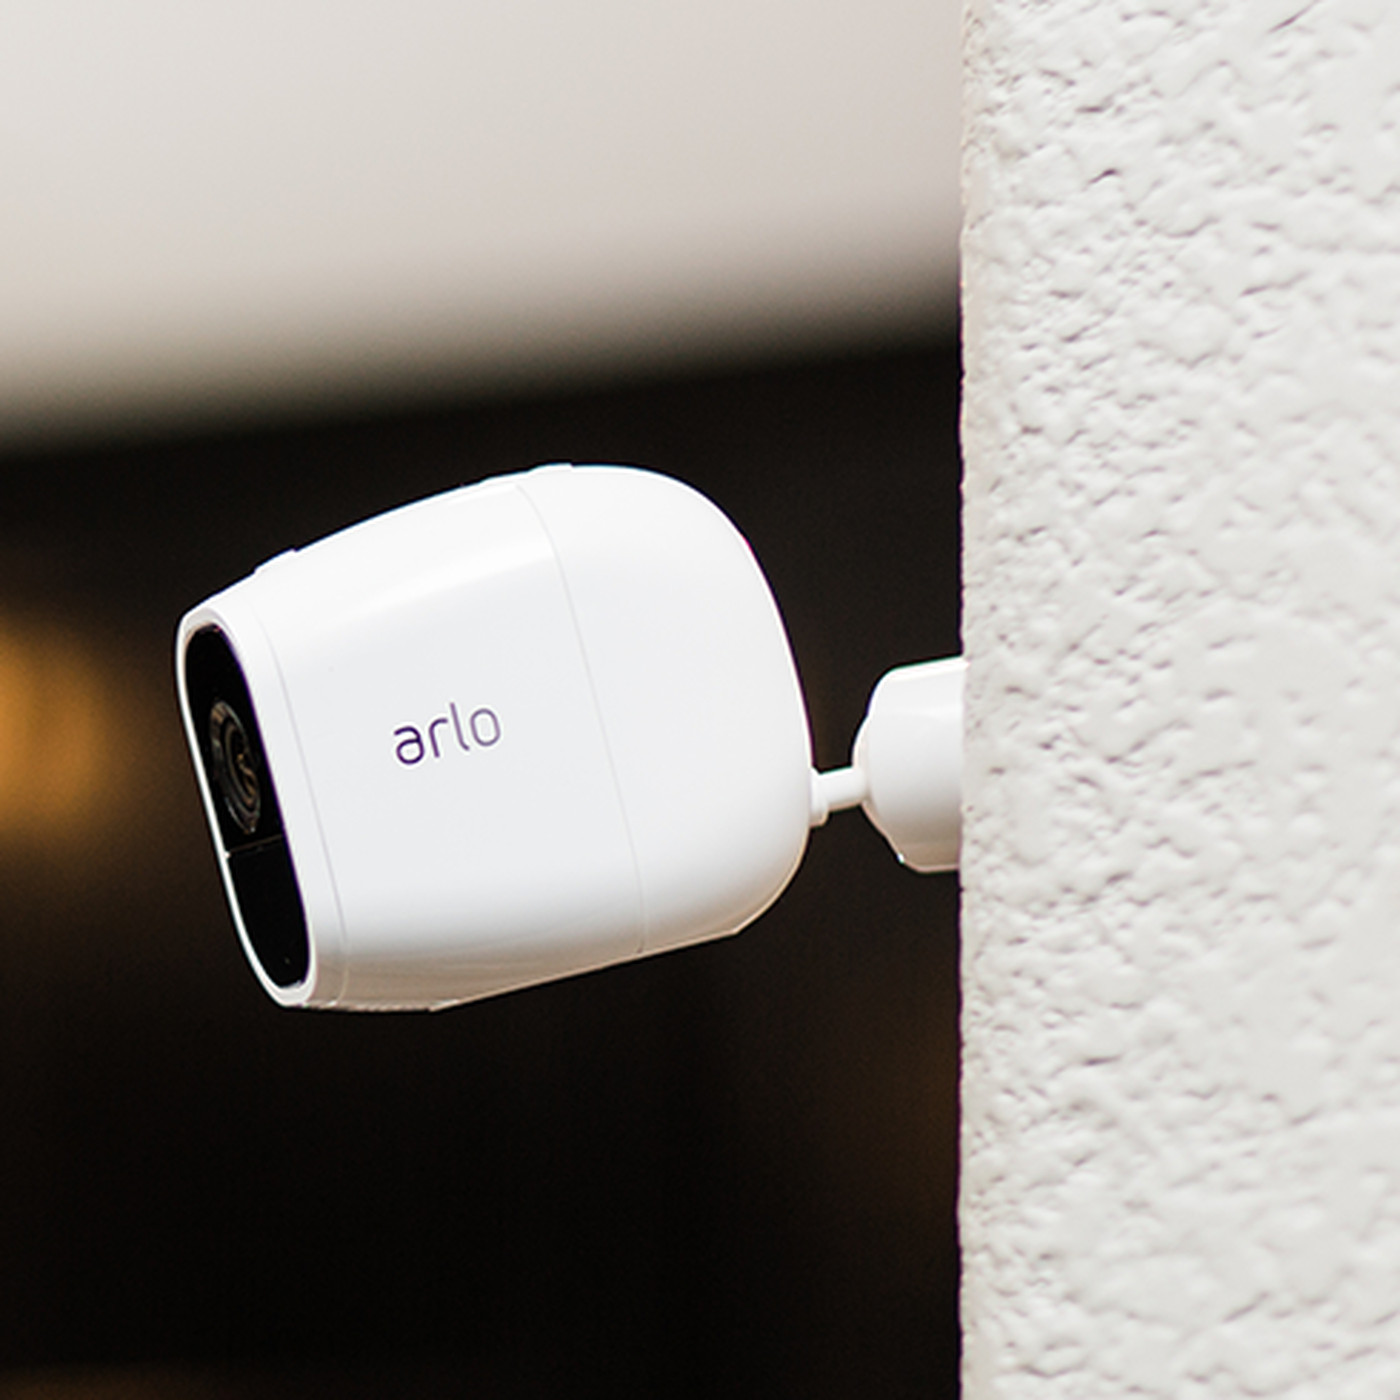 Arlo CEO says company won't take away free seven-day cloud storage from existing customers - Verge